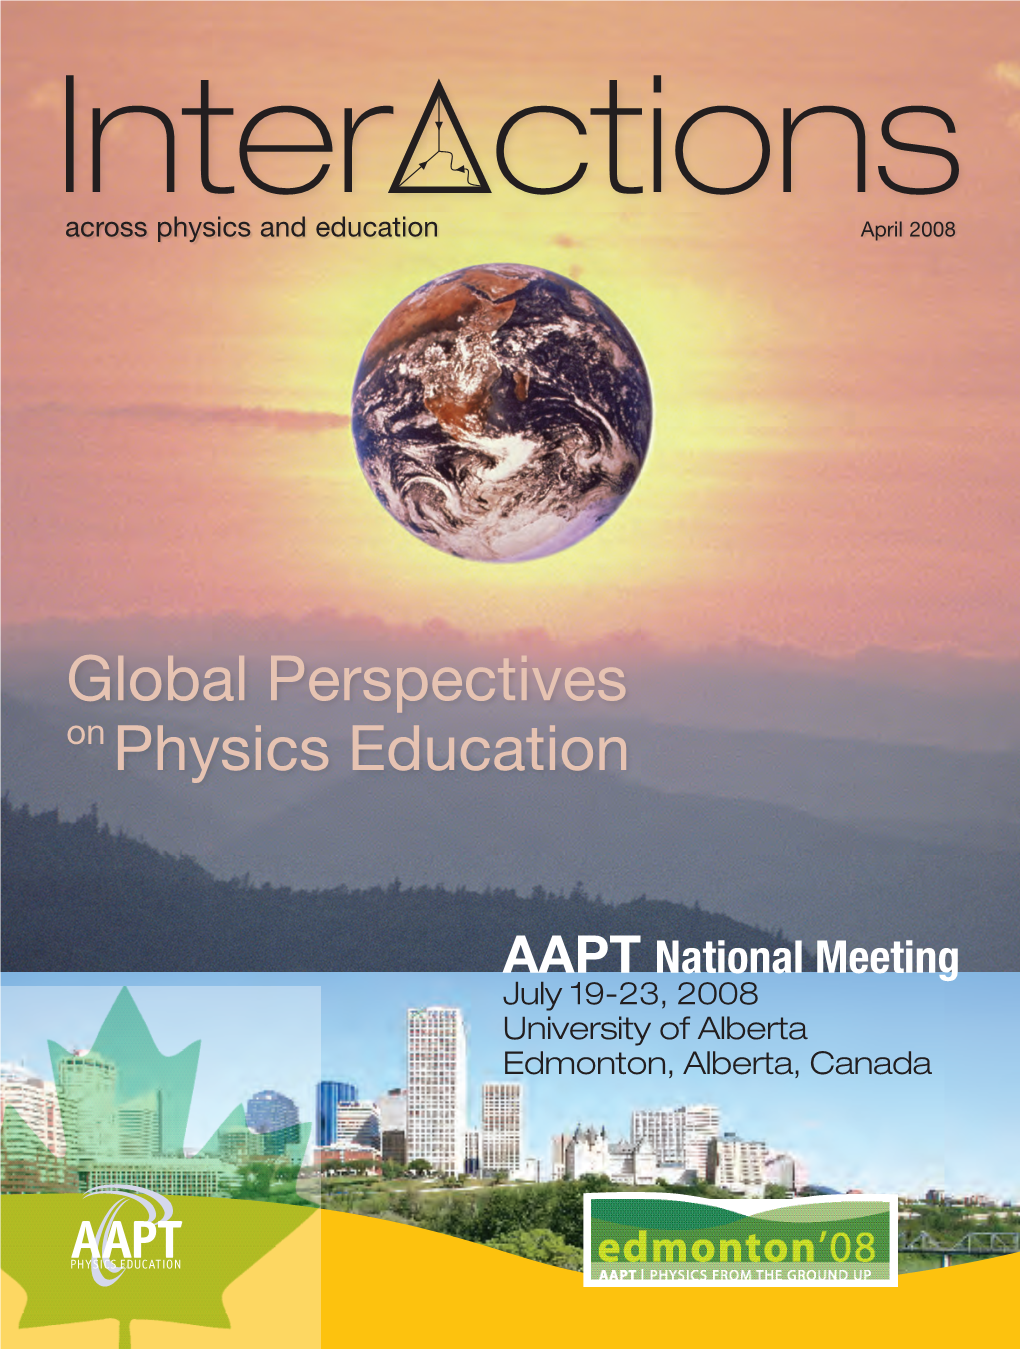 Global Perspectives on Physics Education